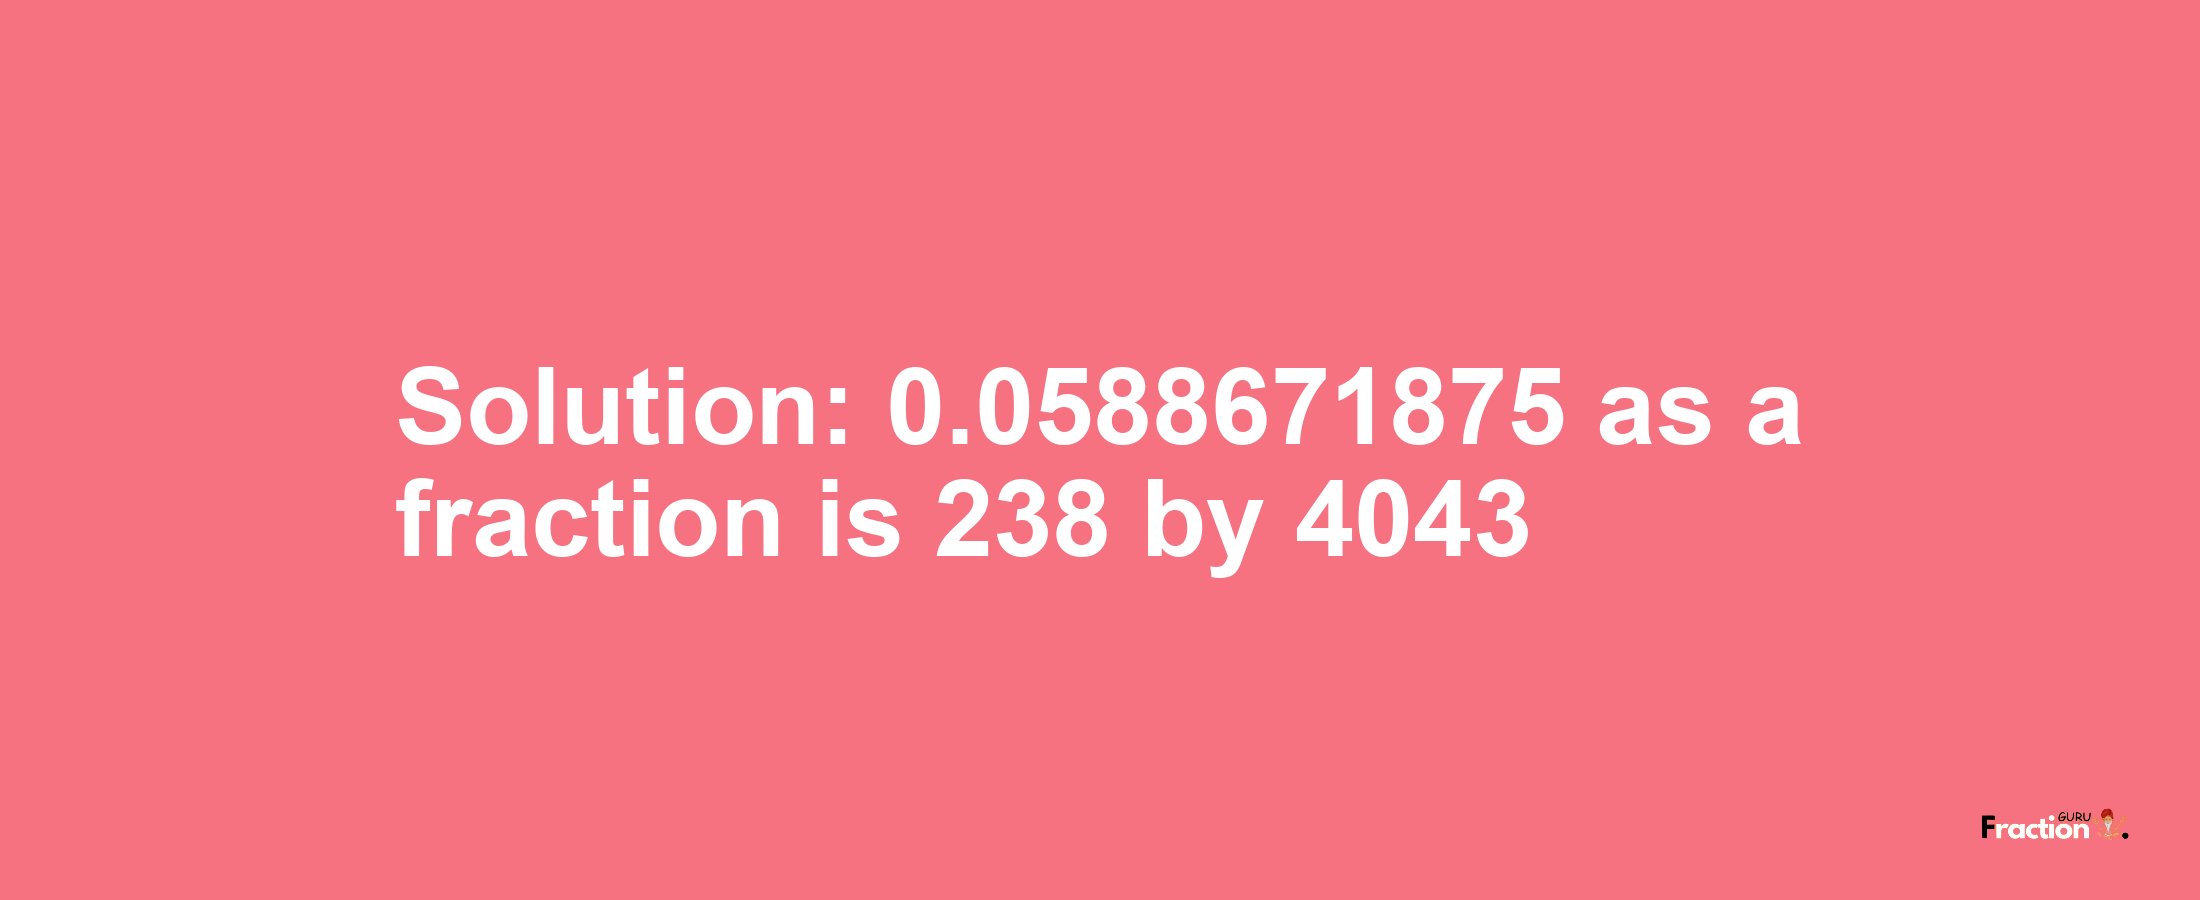 Solution:0.0588671875 as a fraction is 238/4043